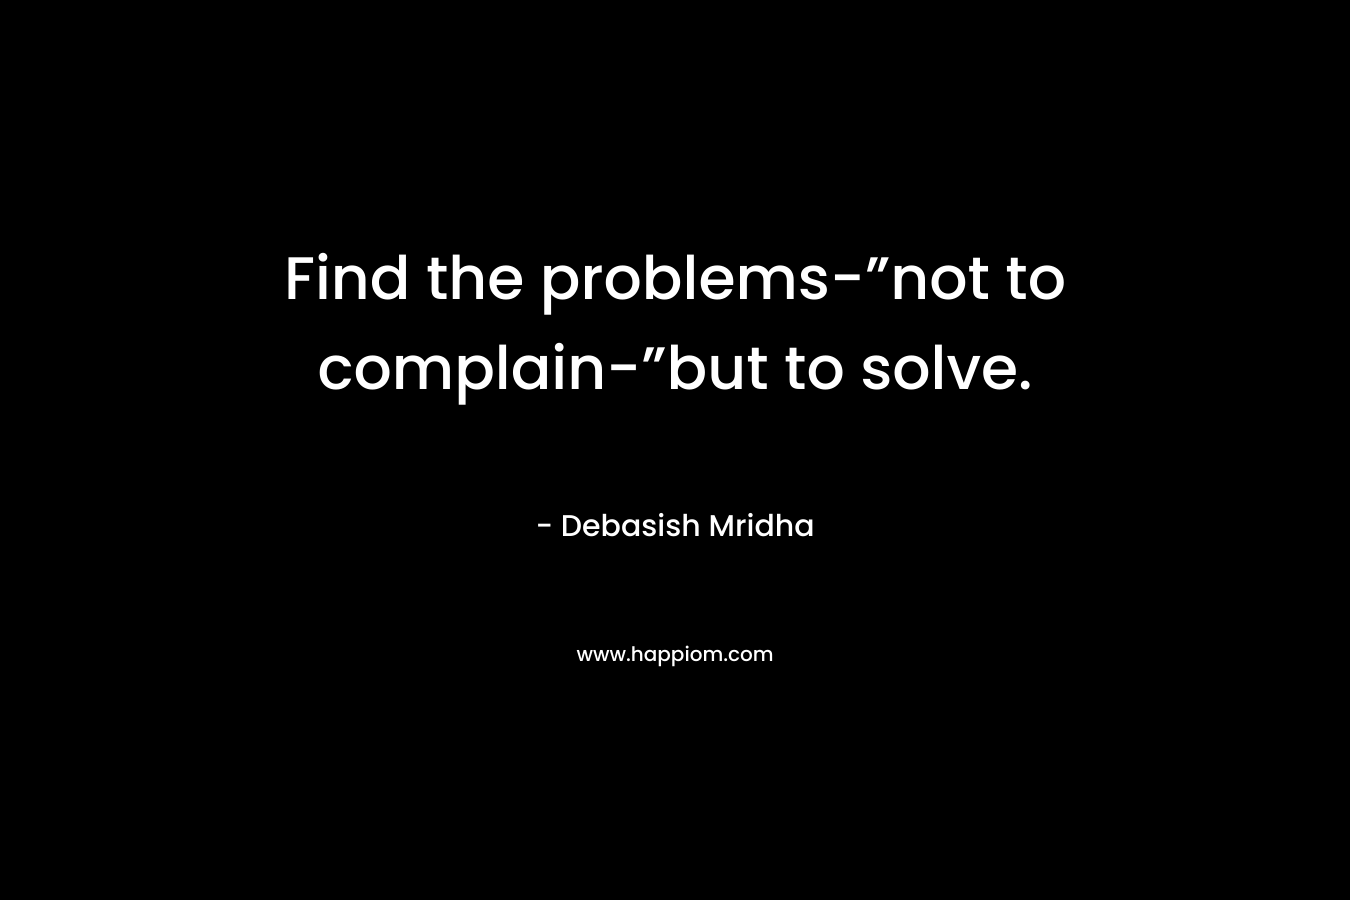 Find the problems-”not to complain-”but to solve.